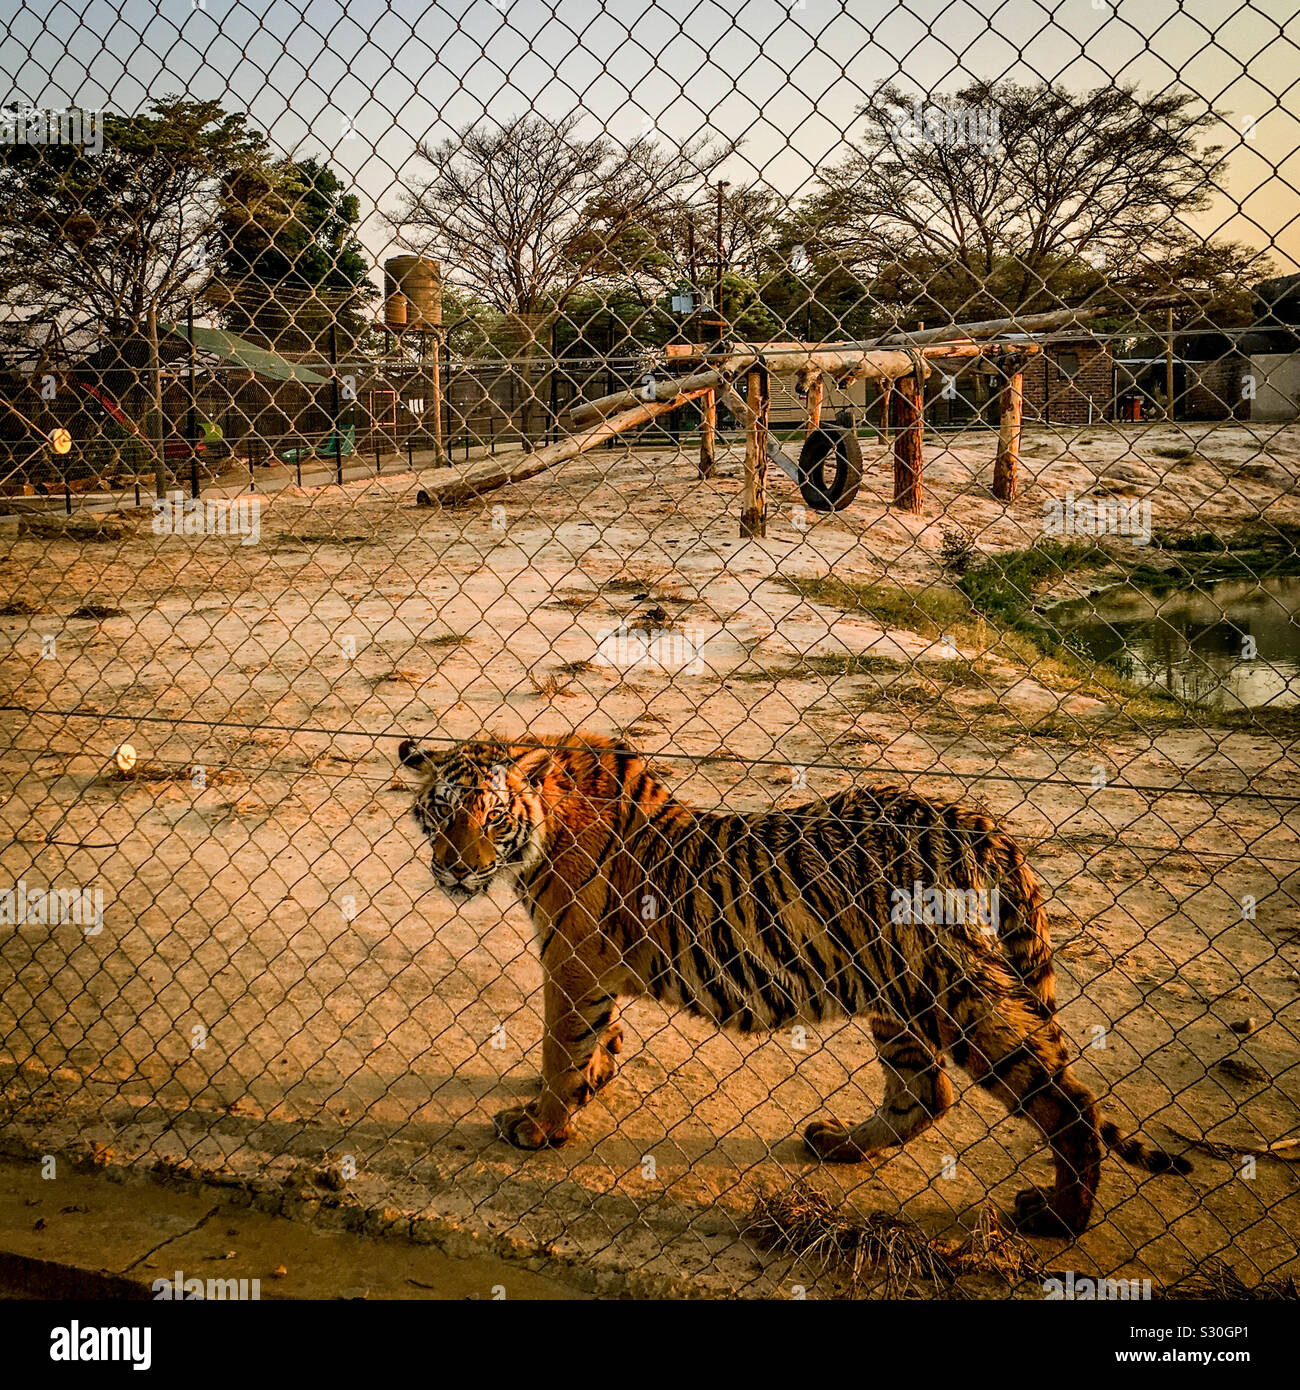 Tiger in big cat captive breeding facility, Limpopo Province, South Africa. Many of these big cats are bred for trophy hunting or to supply “medicinal” bones to Asia. 2016. Stock Photo